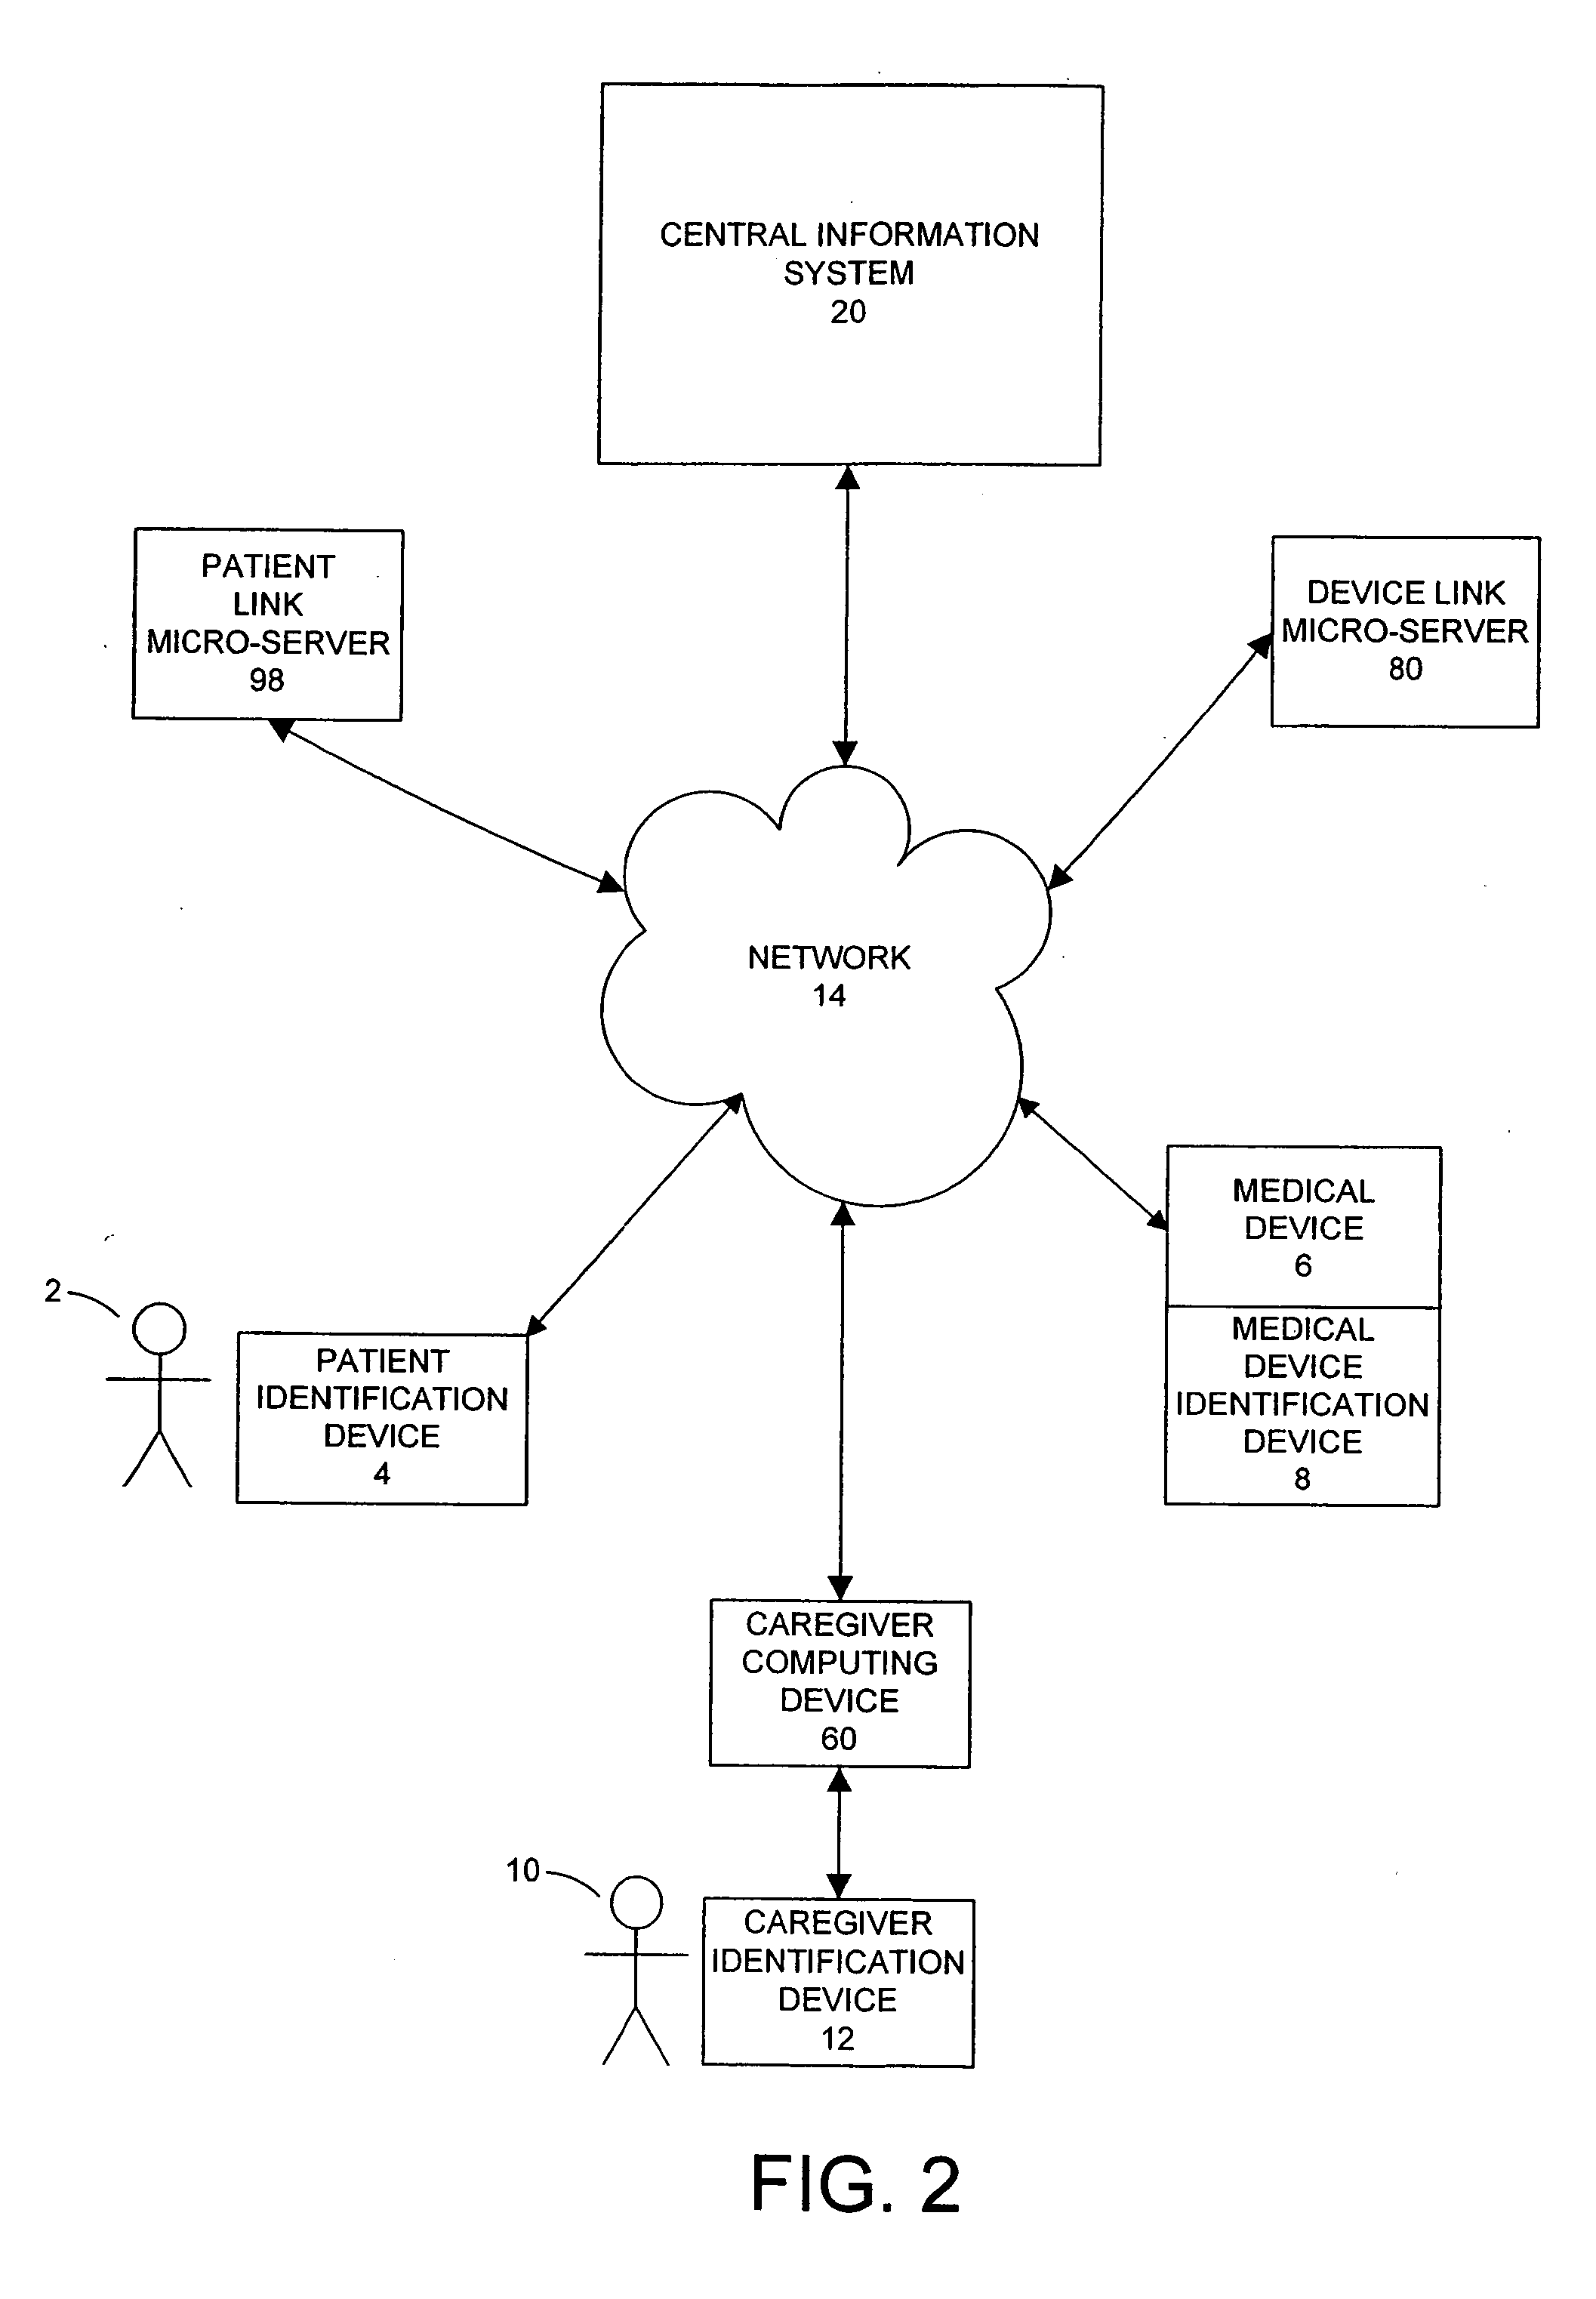 System and method for processing ad hoc orders in an automated patient care environment